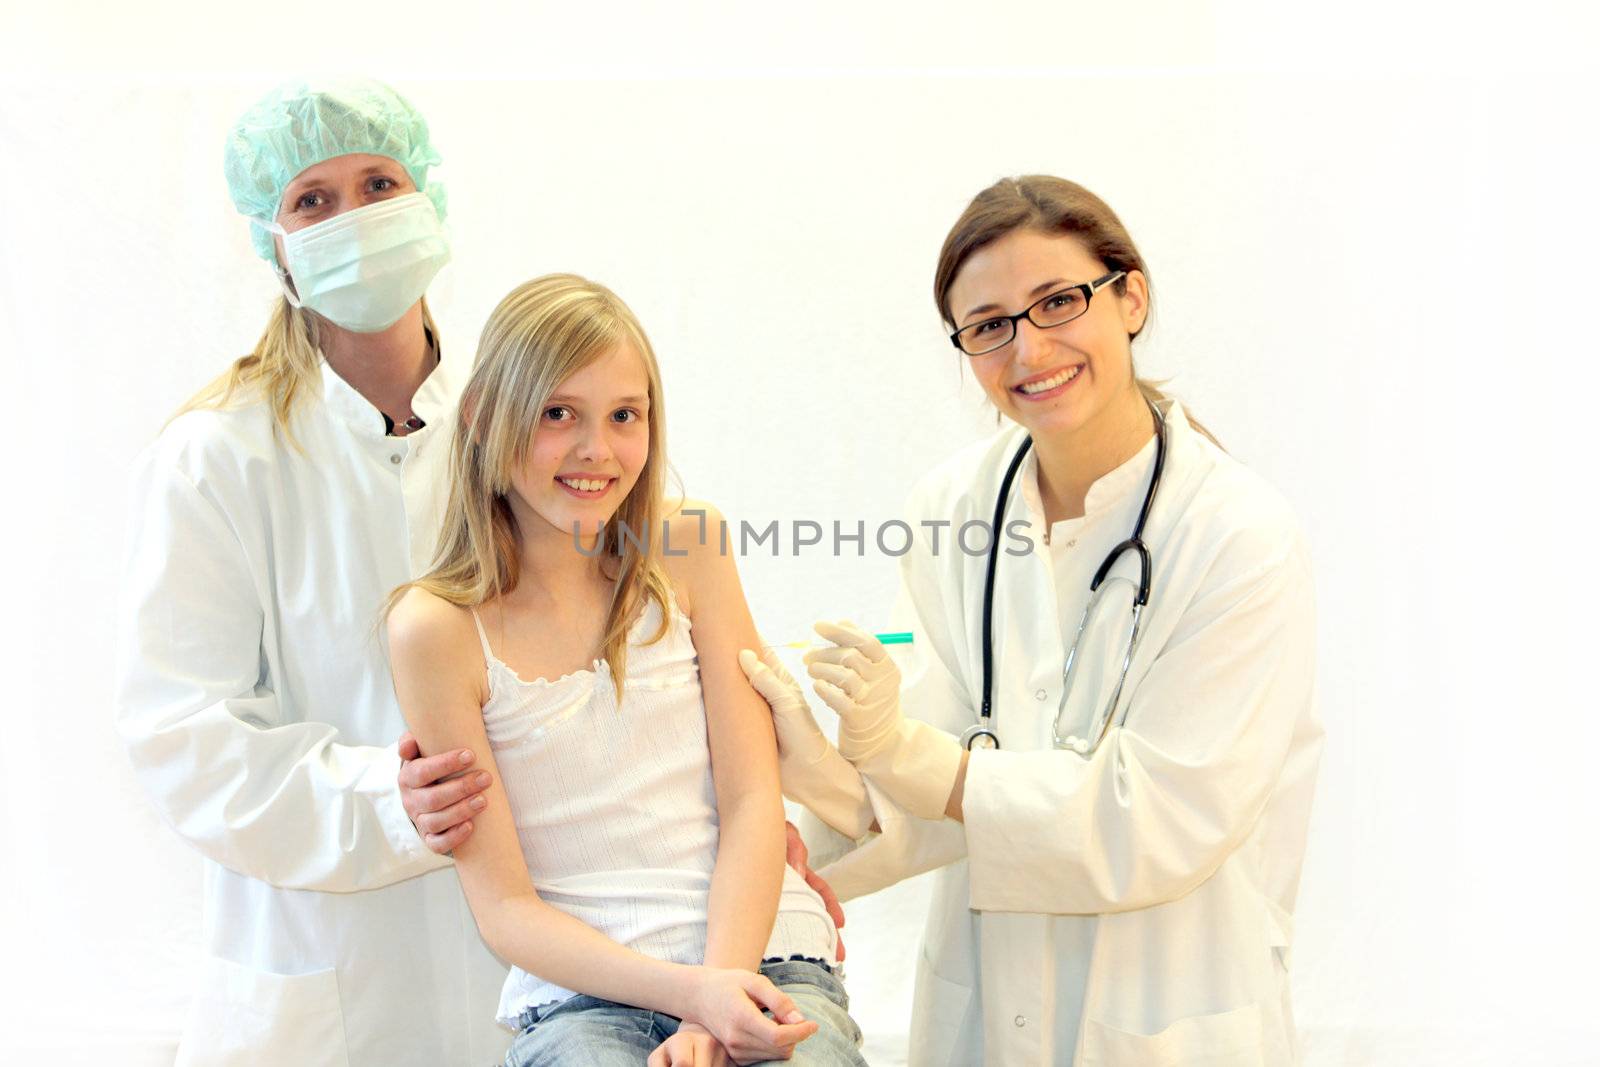 A child is examined by a friendly team of doctors and receives an injection or vaccination - all looking towards the camera and smile